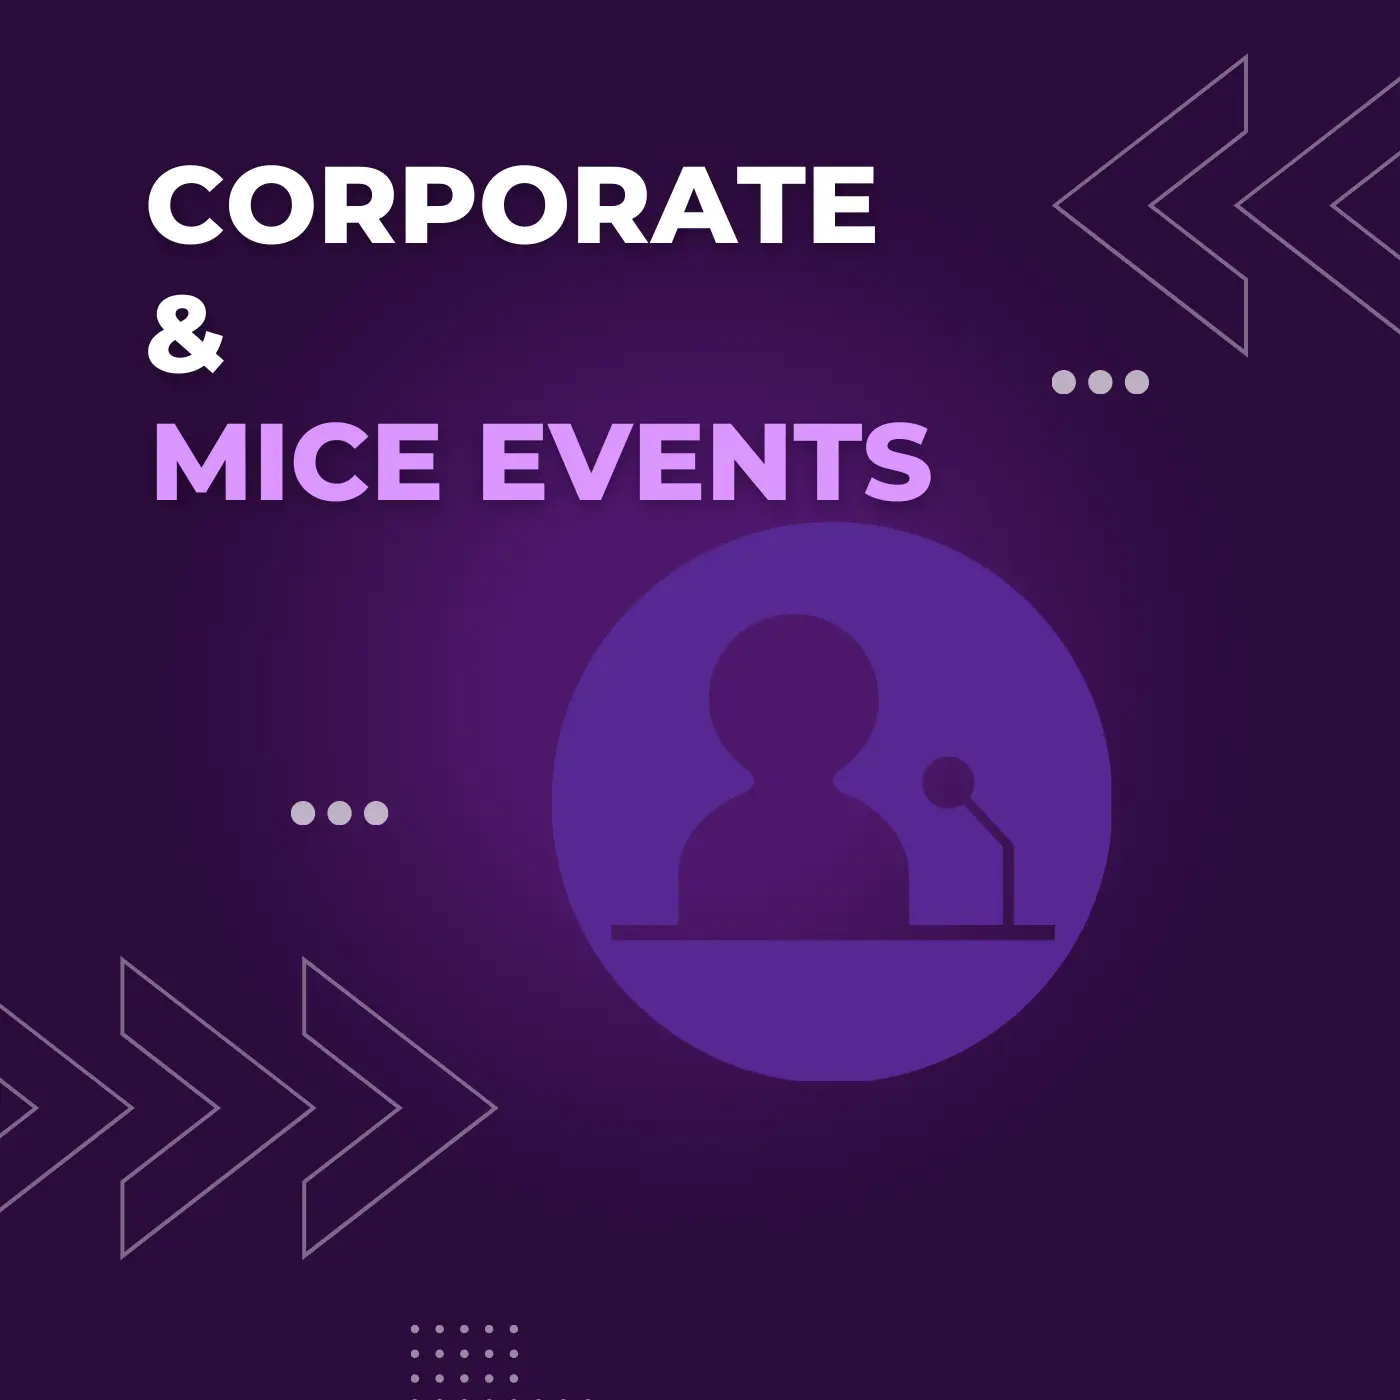 Corporate & MICE Events, Event Management Goa